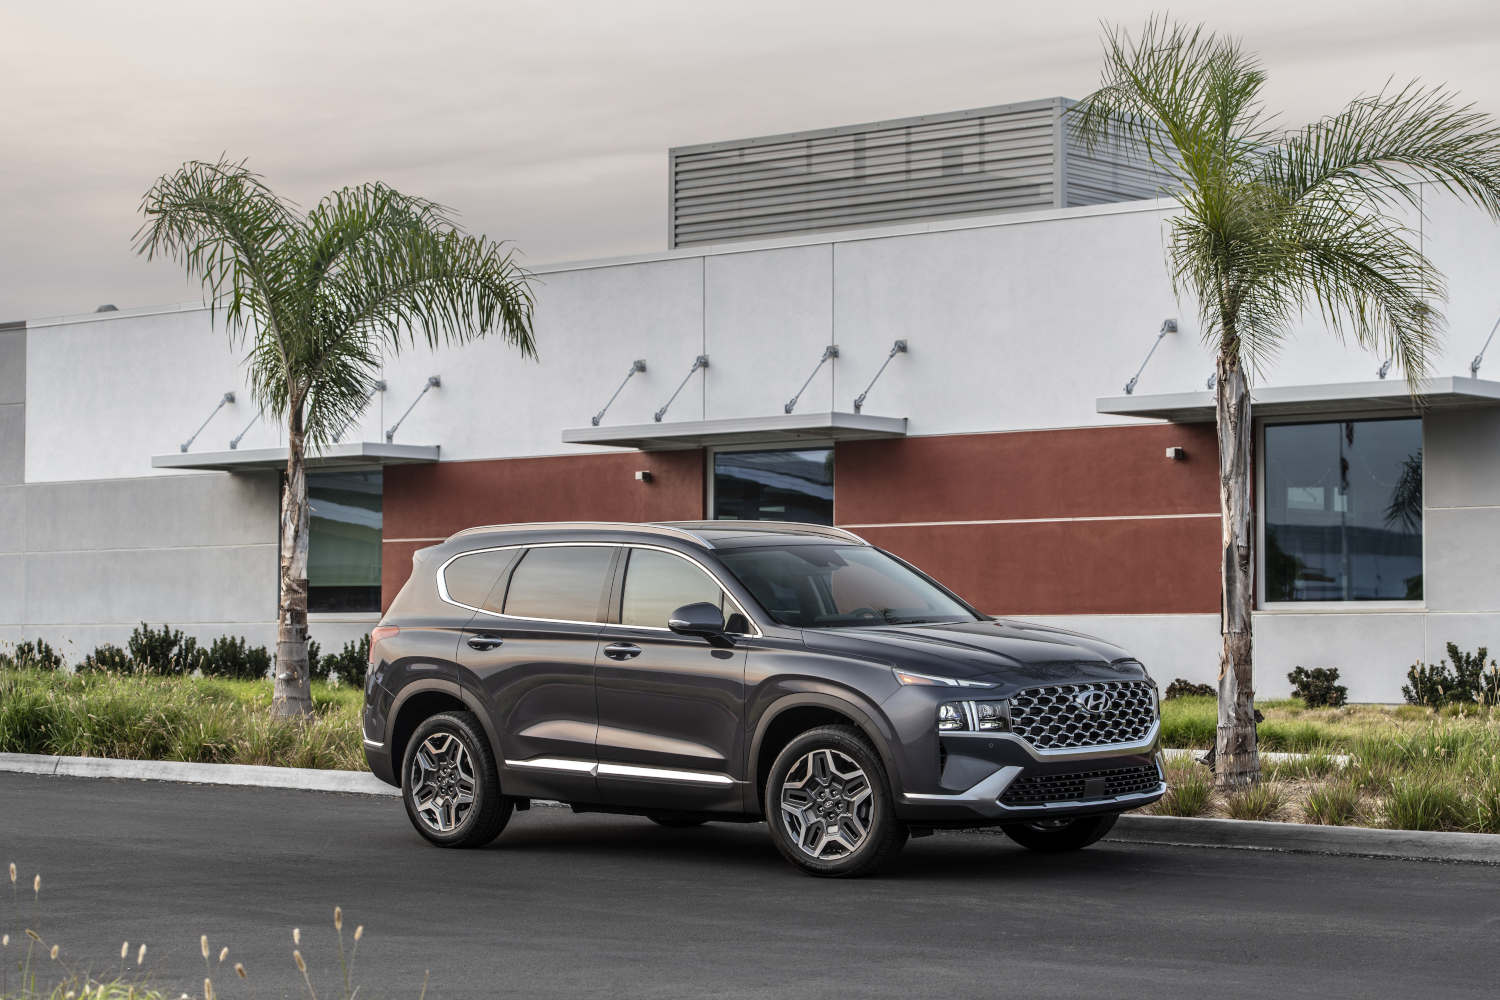 The best SUV for the money is this 2023 Hyundai Santa Fe